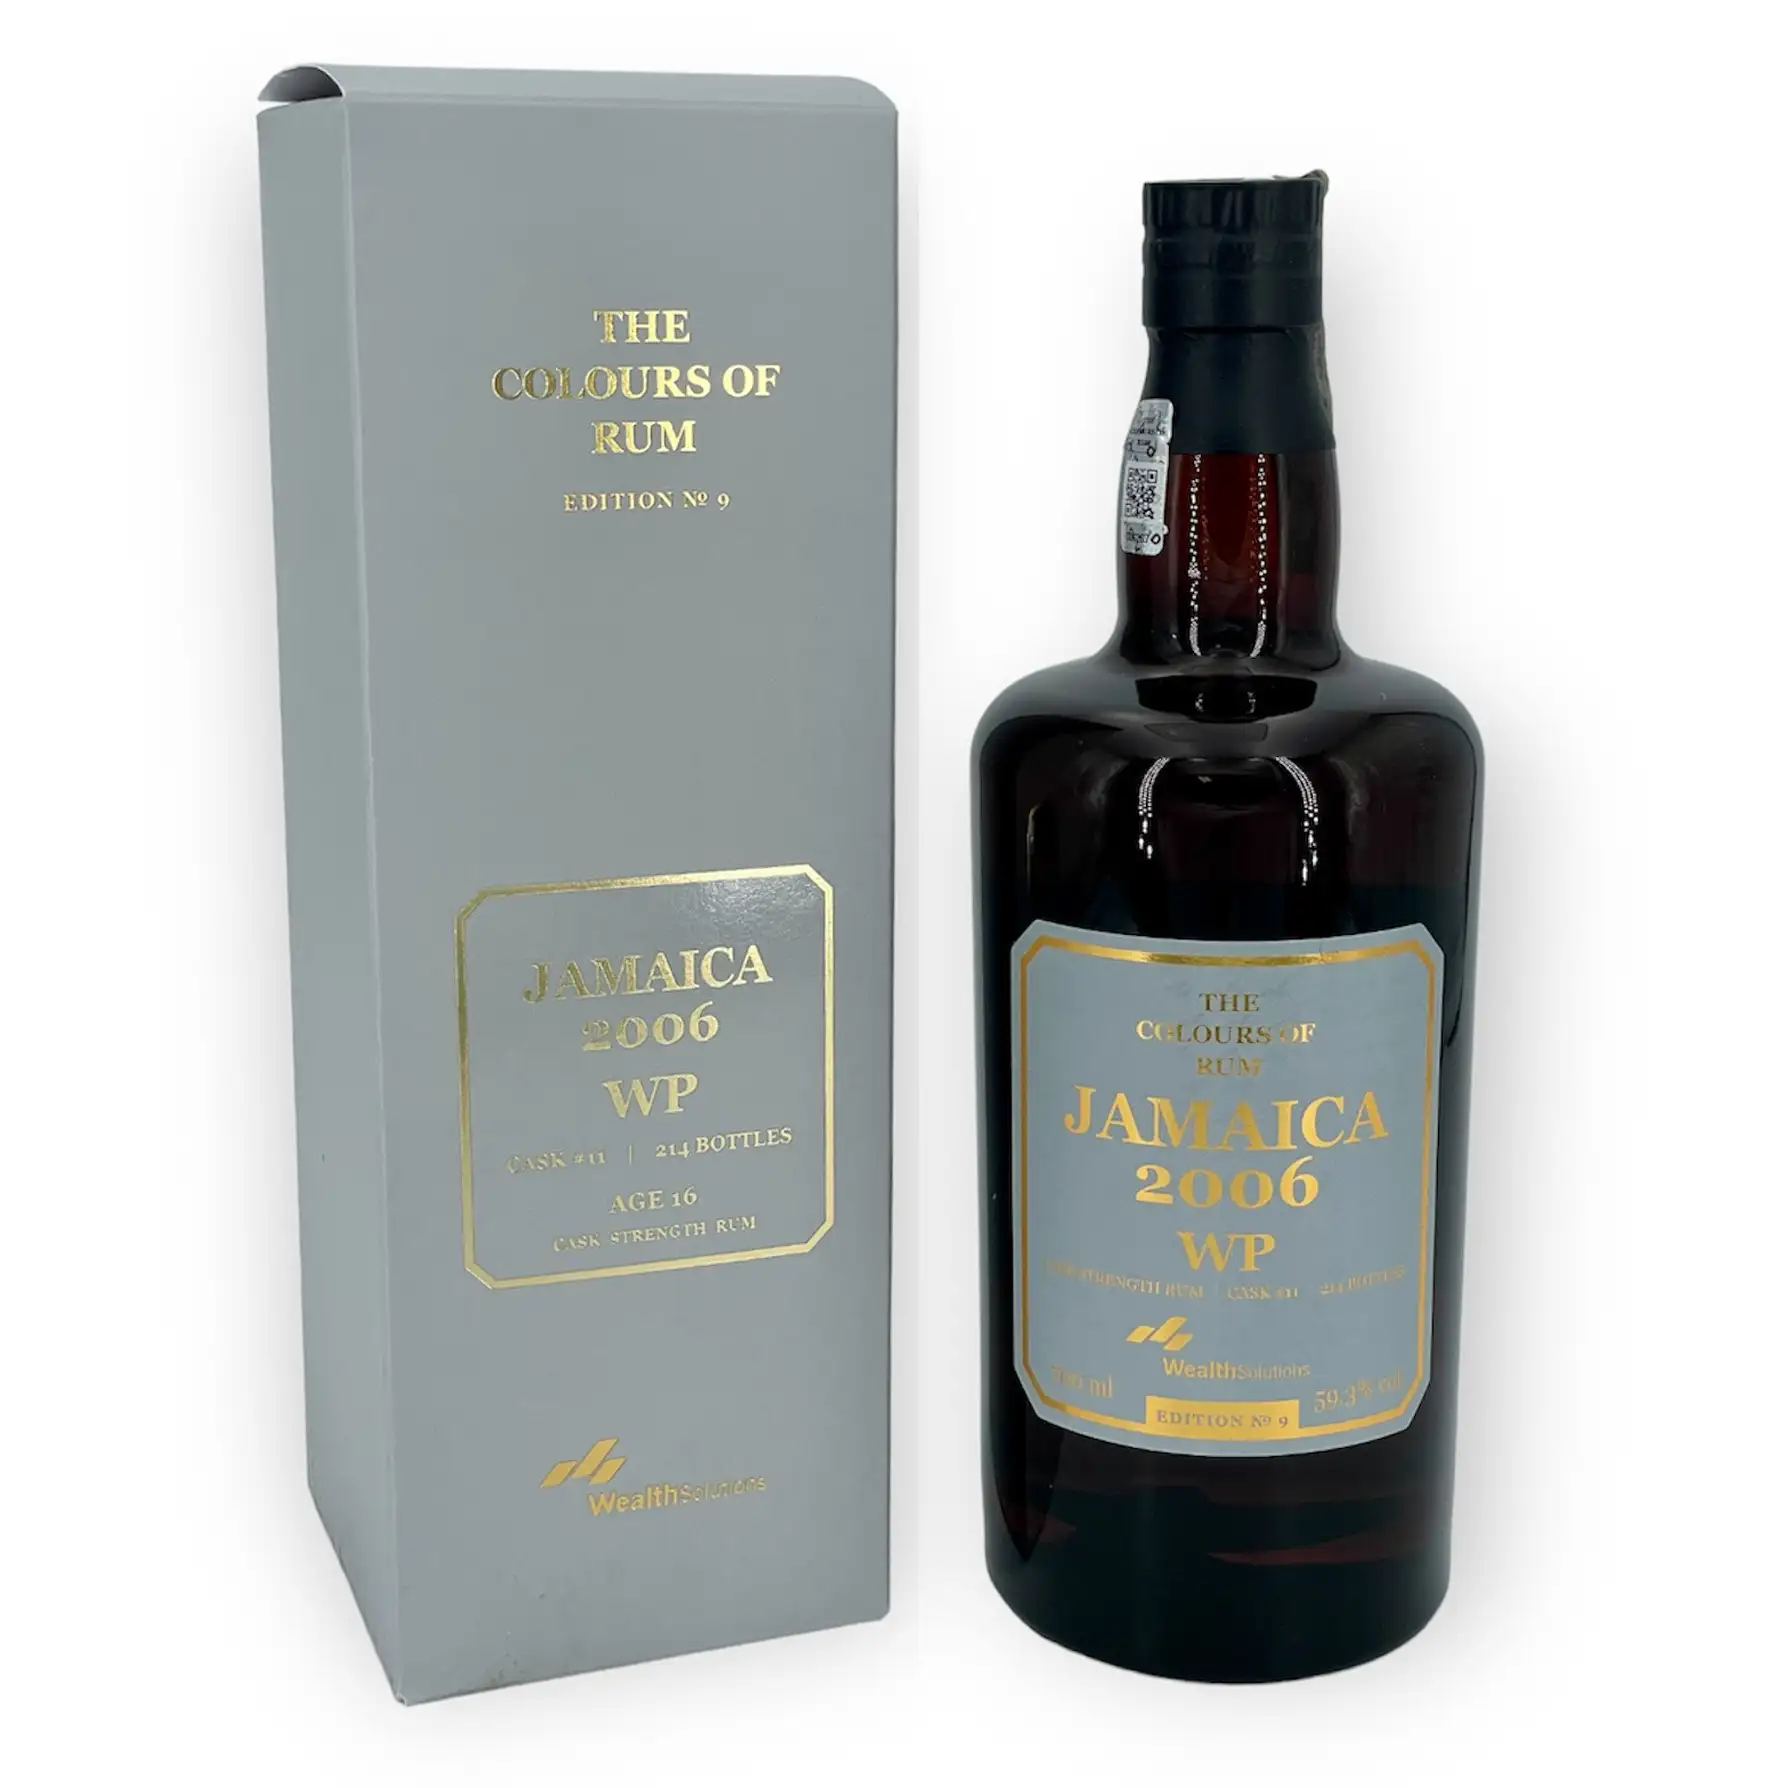 Image of the front of the bottle of the rum Jamaica No. 9